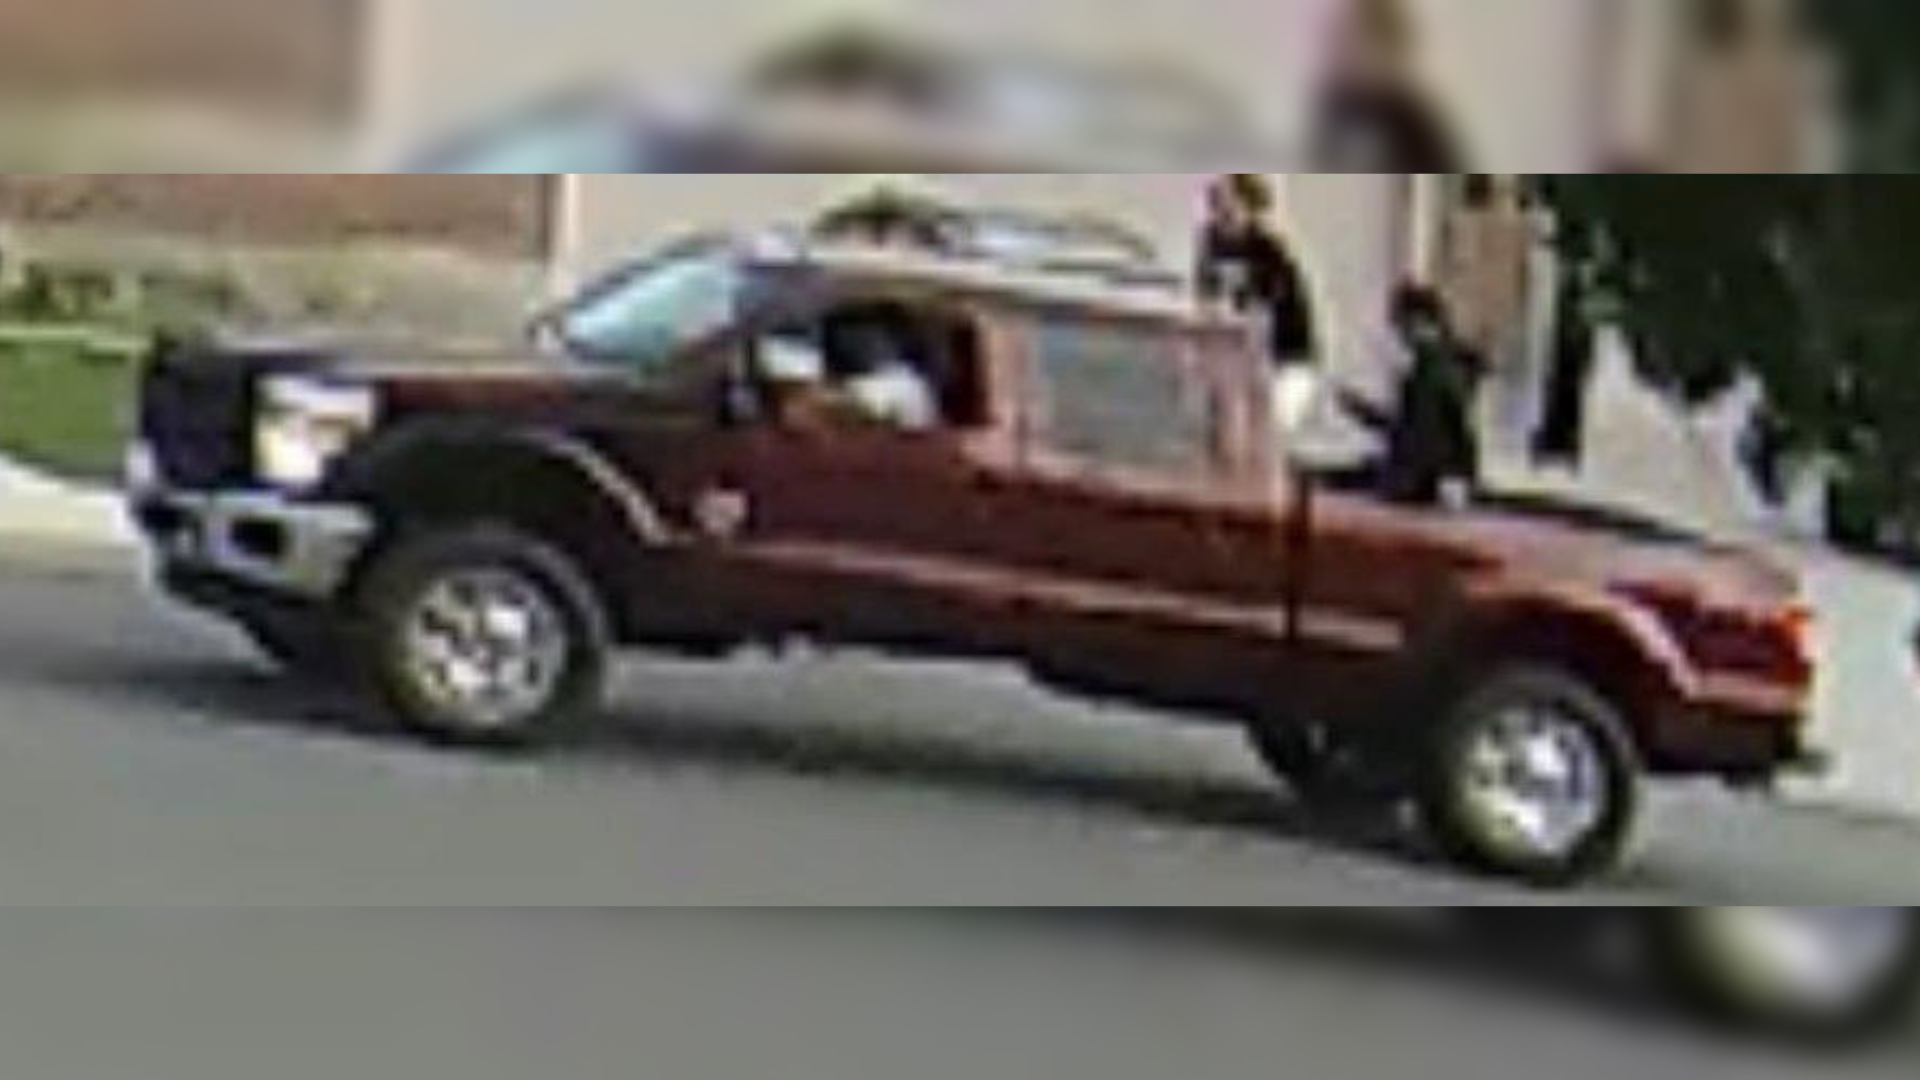 a blurry photo shows teens in a large red truck that are suspected of a water balloon assault in sp...